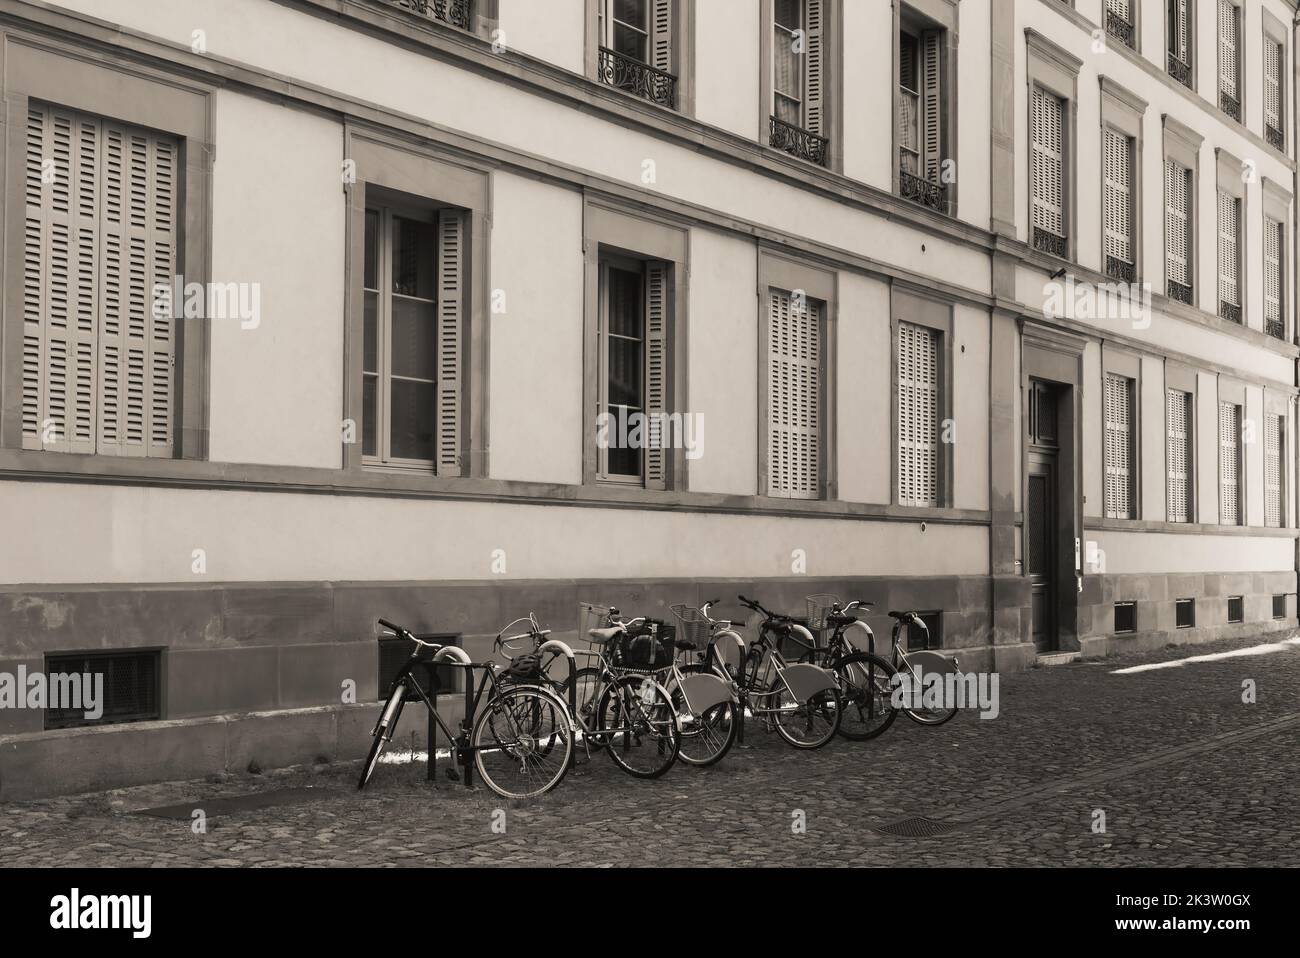 Bicycles parked on the street in Strasbourg France Stock Photo